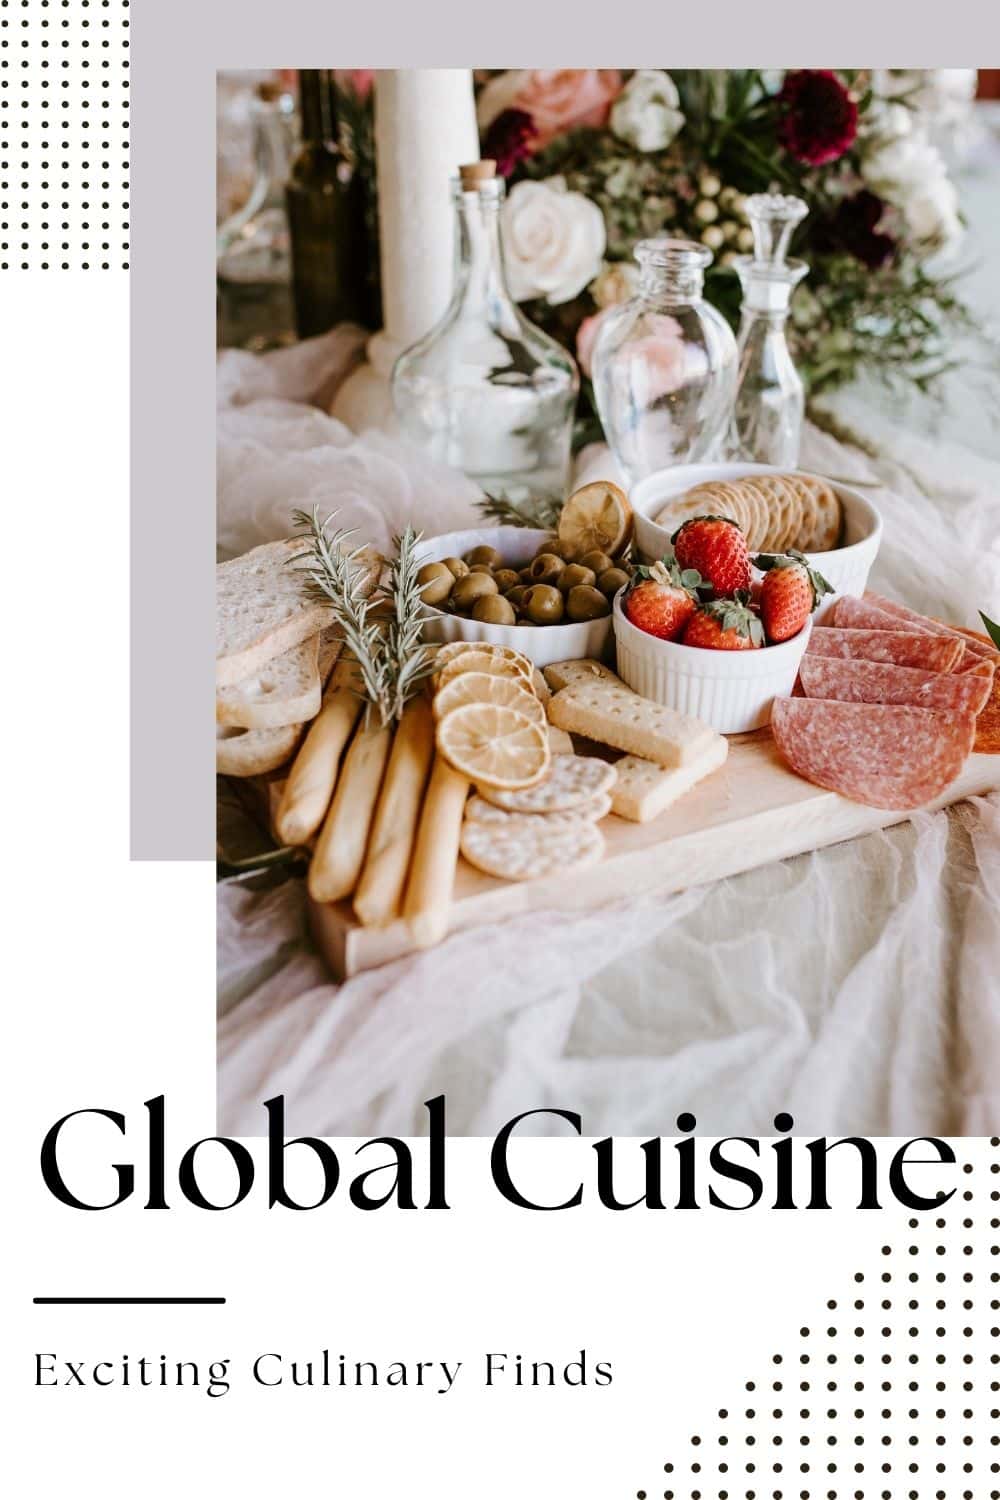 Global Cuisine from Italy to Barcelona spread of food